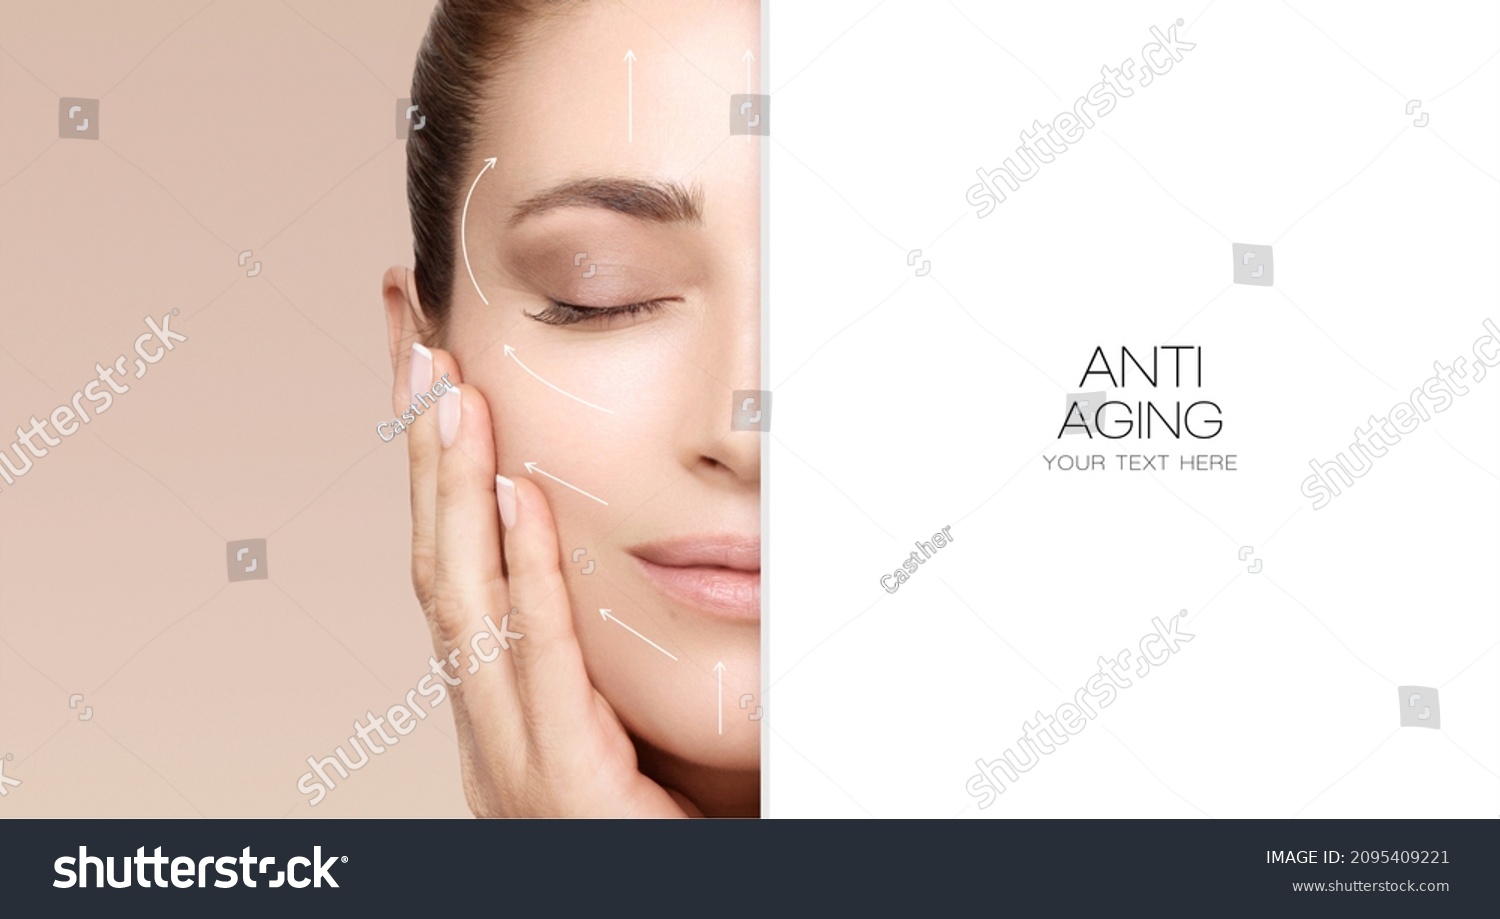 Facelift and Anti Aging Concept. Beauty Face Spa Woman with Lifting Arrows. Half face cropped with white copy space to the side. Beauty portrait isolated on beige background. #2095409221